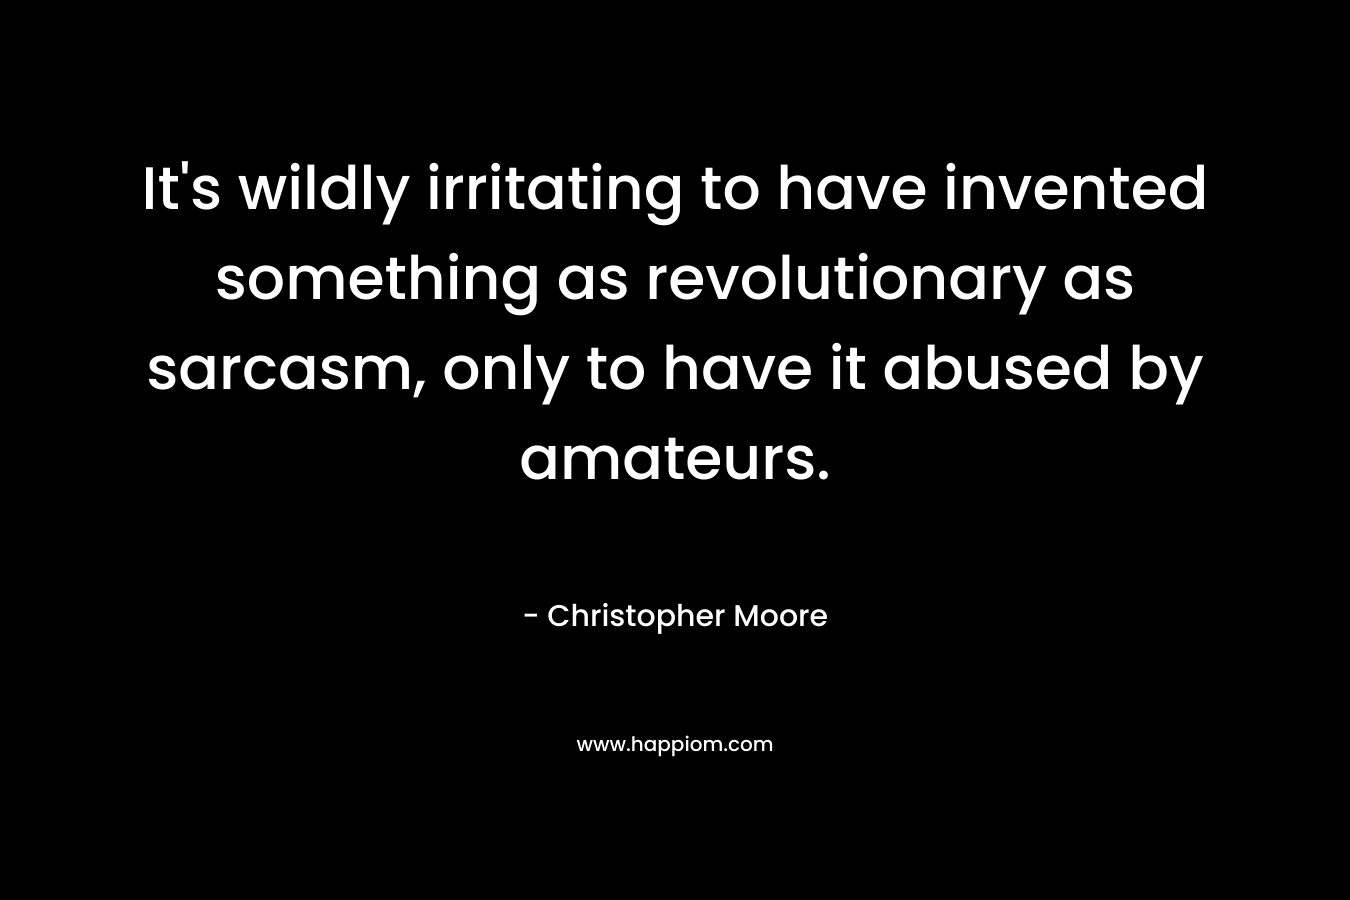 It’s wildly irritating to have invented something as revolutionary as sarcasm, only to have it abused by amateurs. – Christopher Moore